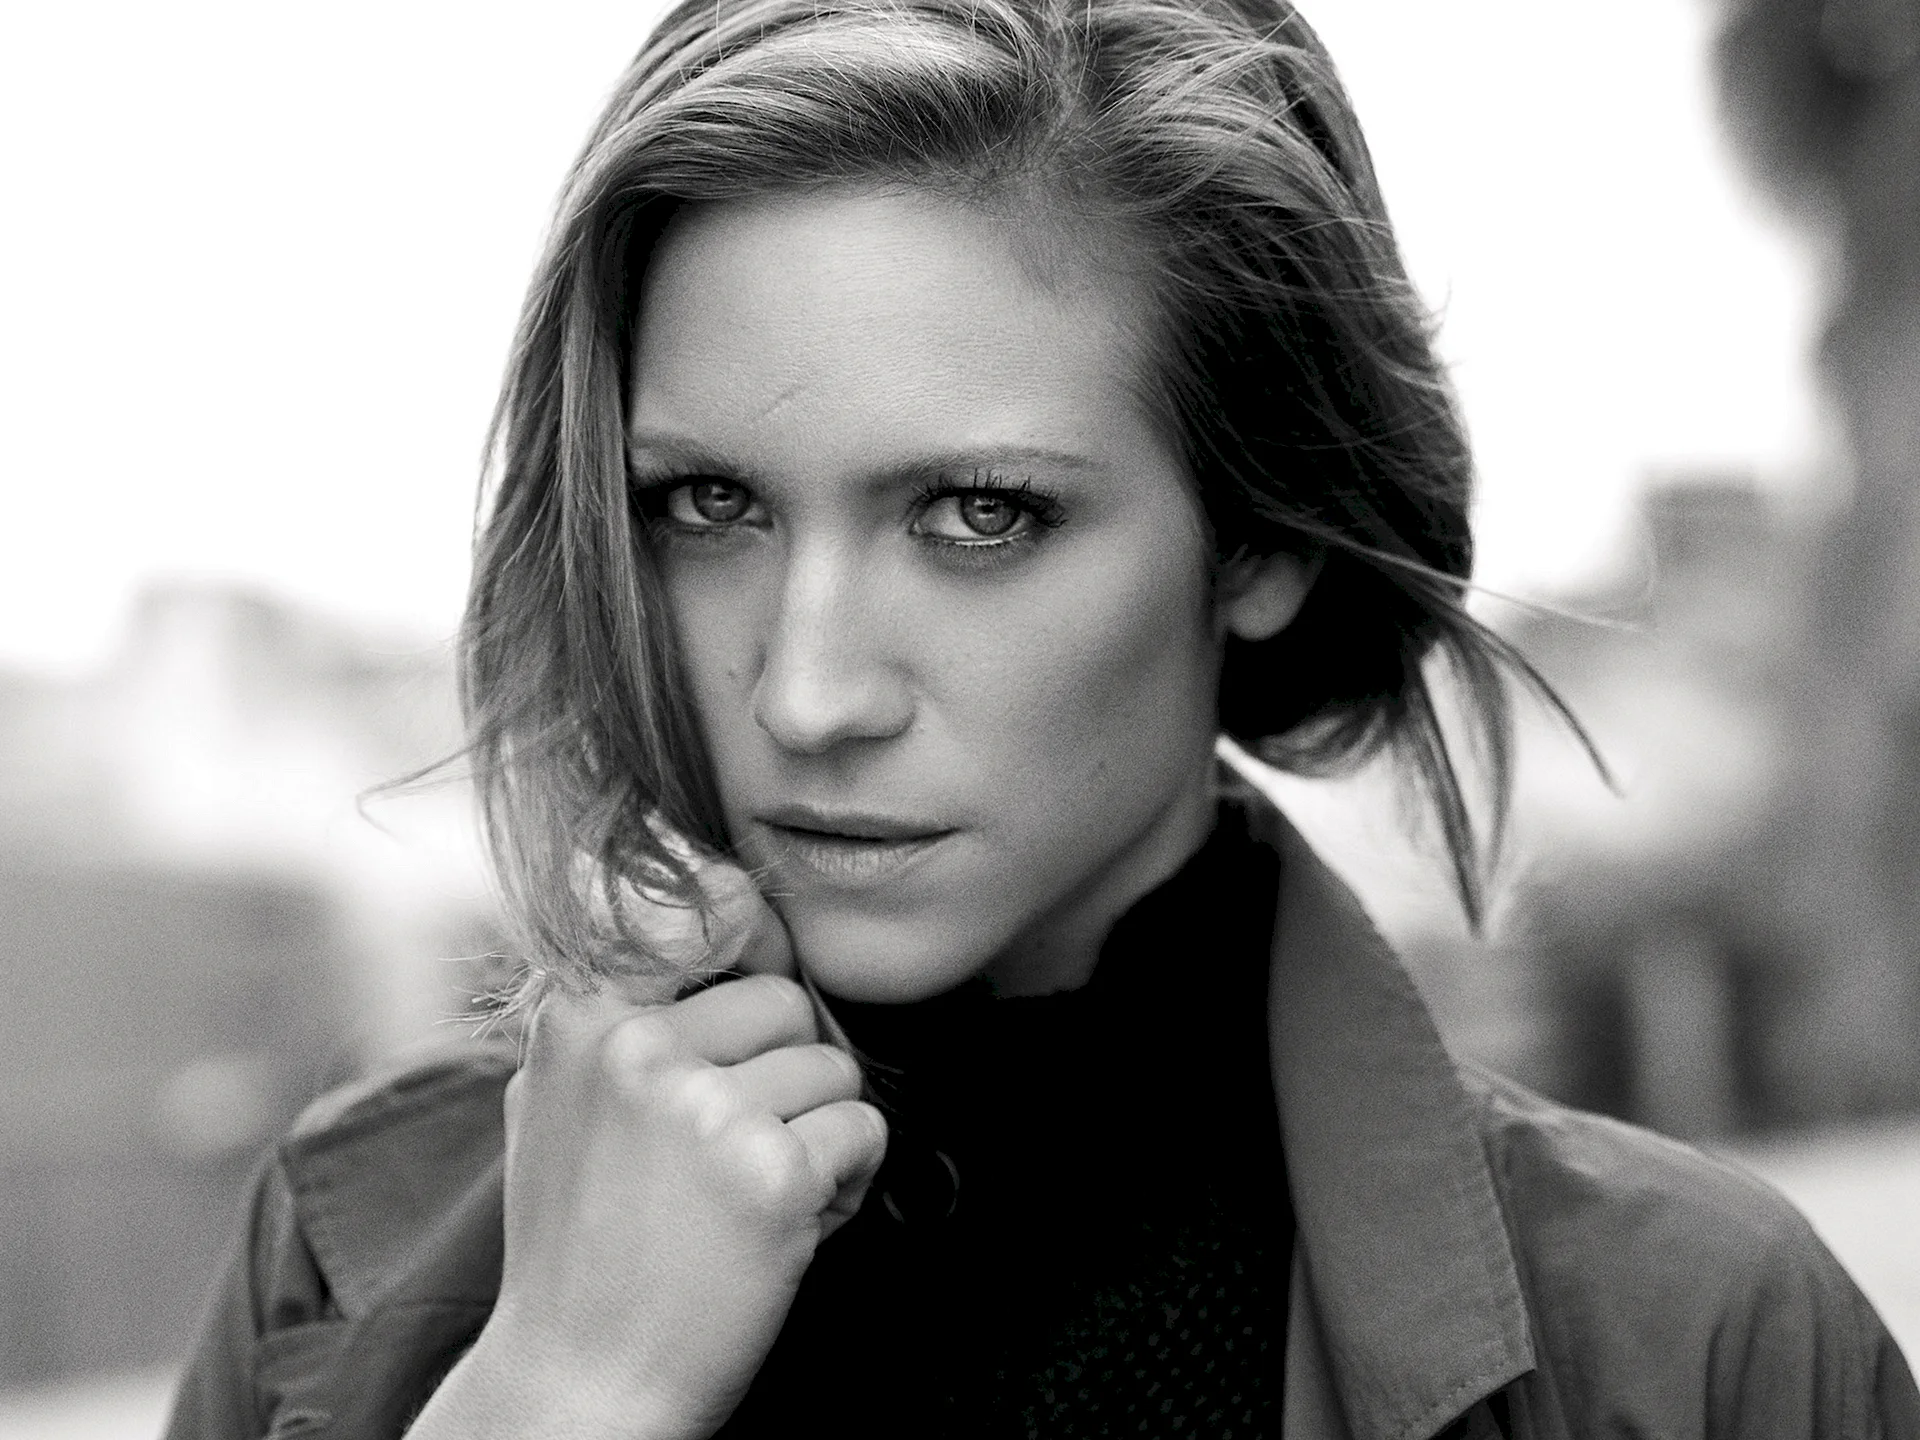 Brittany Snow face Wallpaper